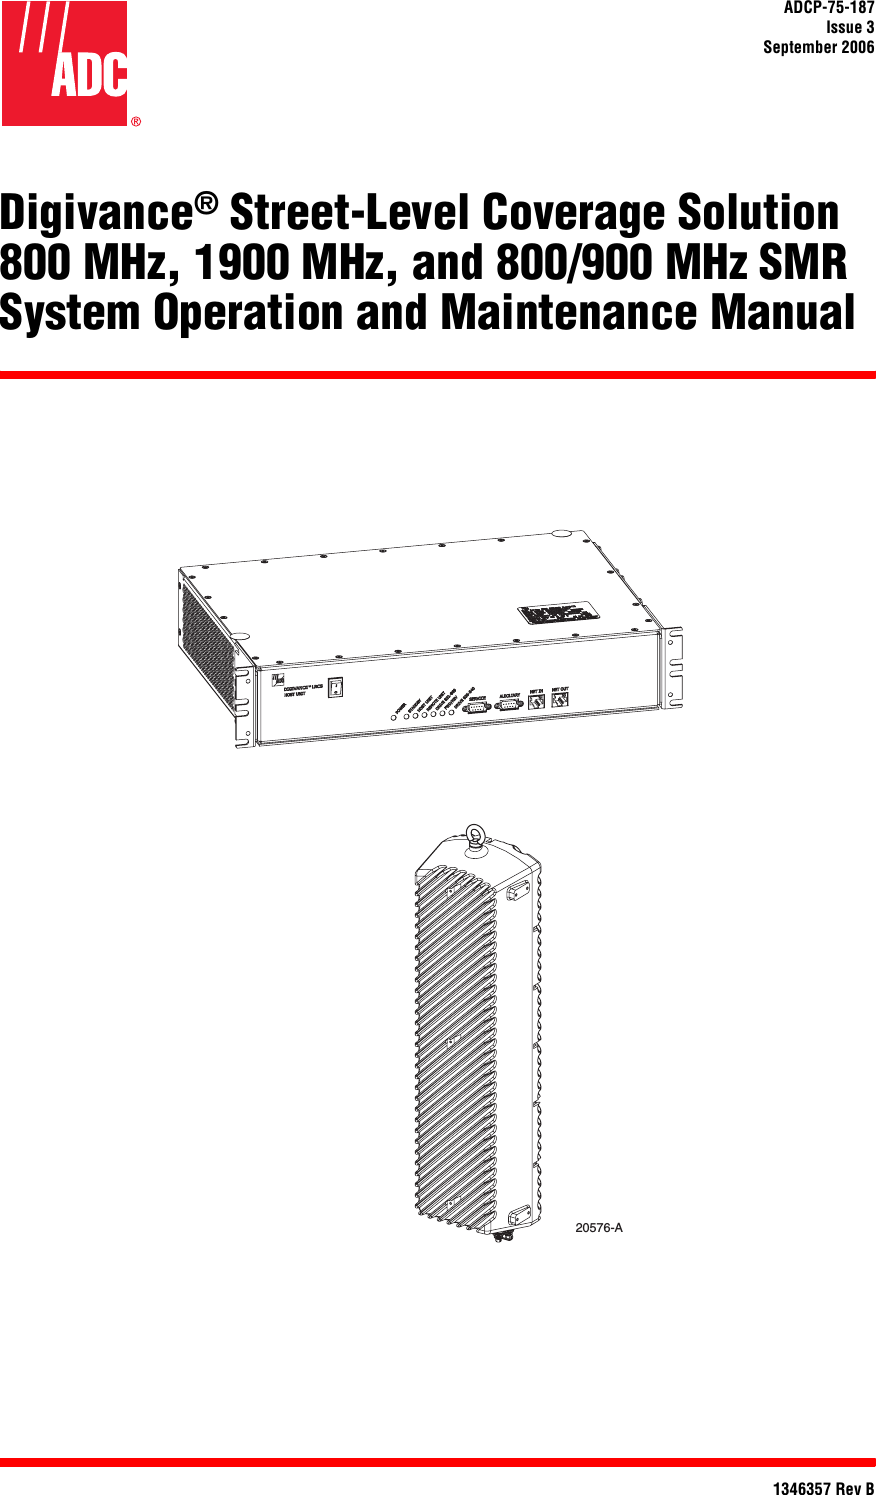 ADCP-75-187Issue 3September 20061346357 Rev BDigivance® Street-Level Coverage Solution 800 MHz, 1900 MHz, and 800/900 MHz SMR System Operation and Maintenance Manual20576-A